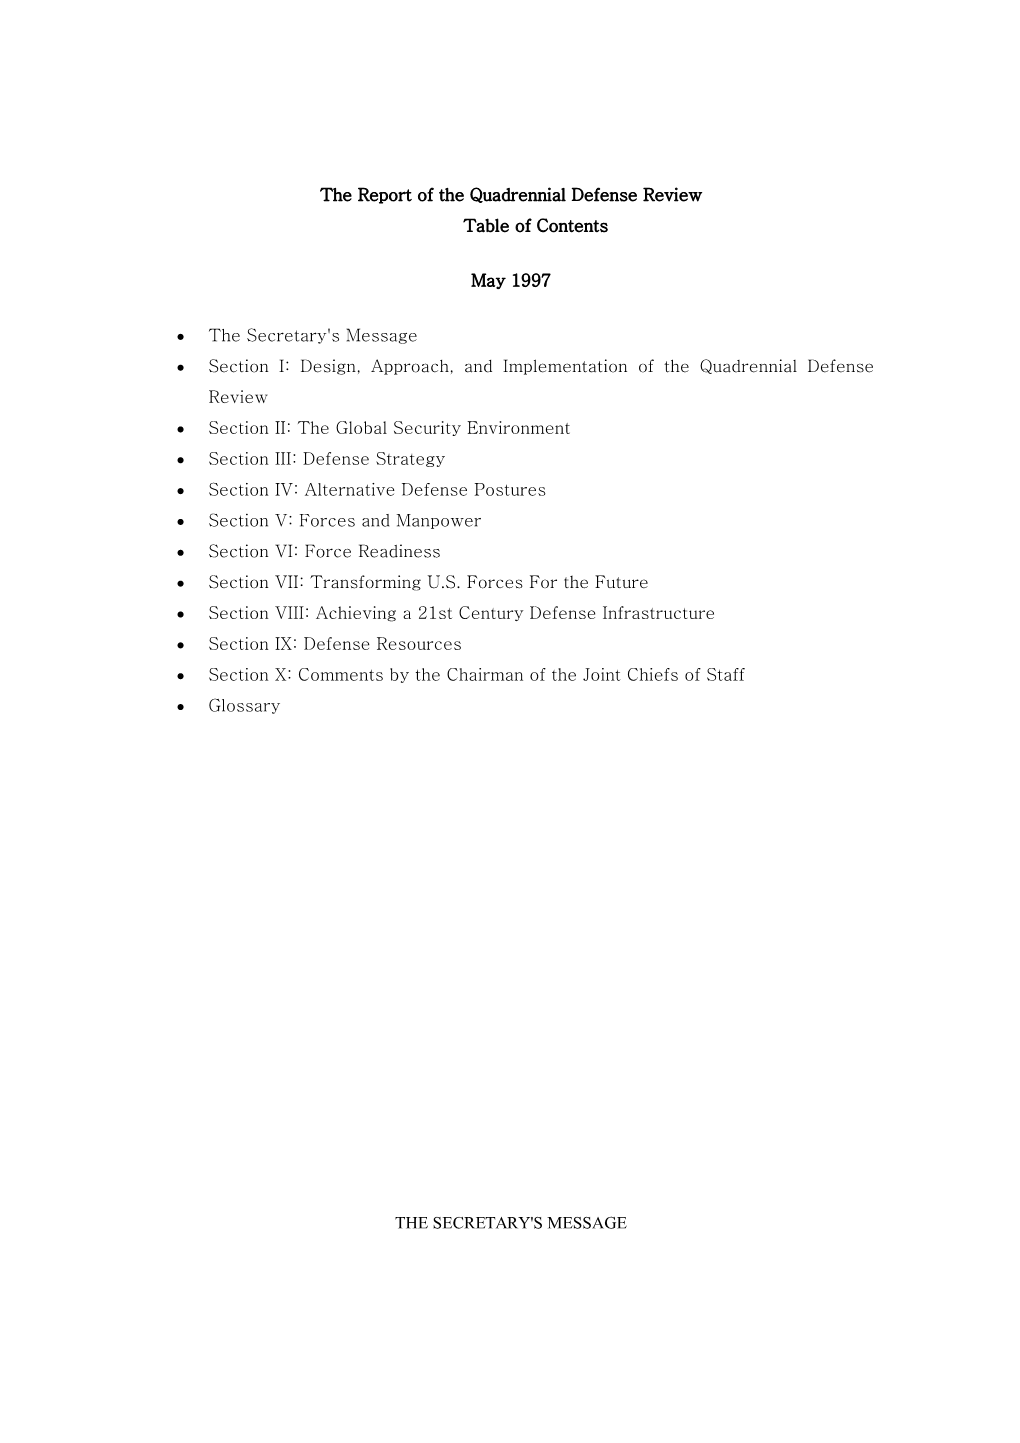 The Report of the Quadrennial Defense Review